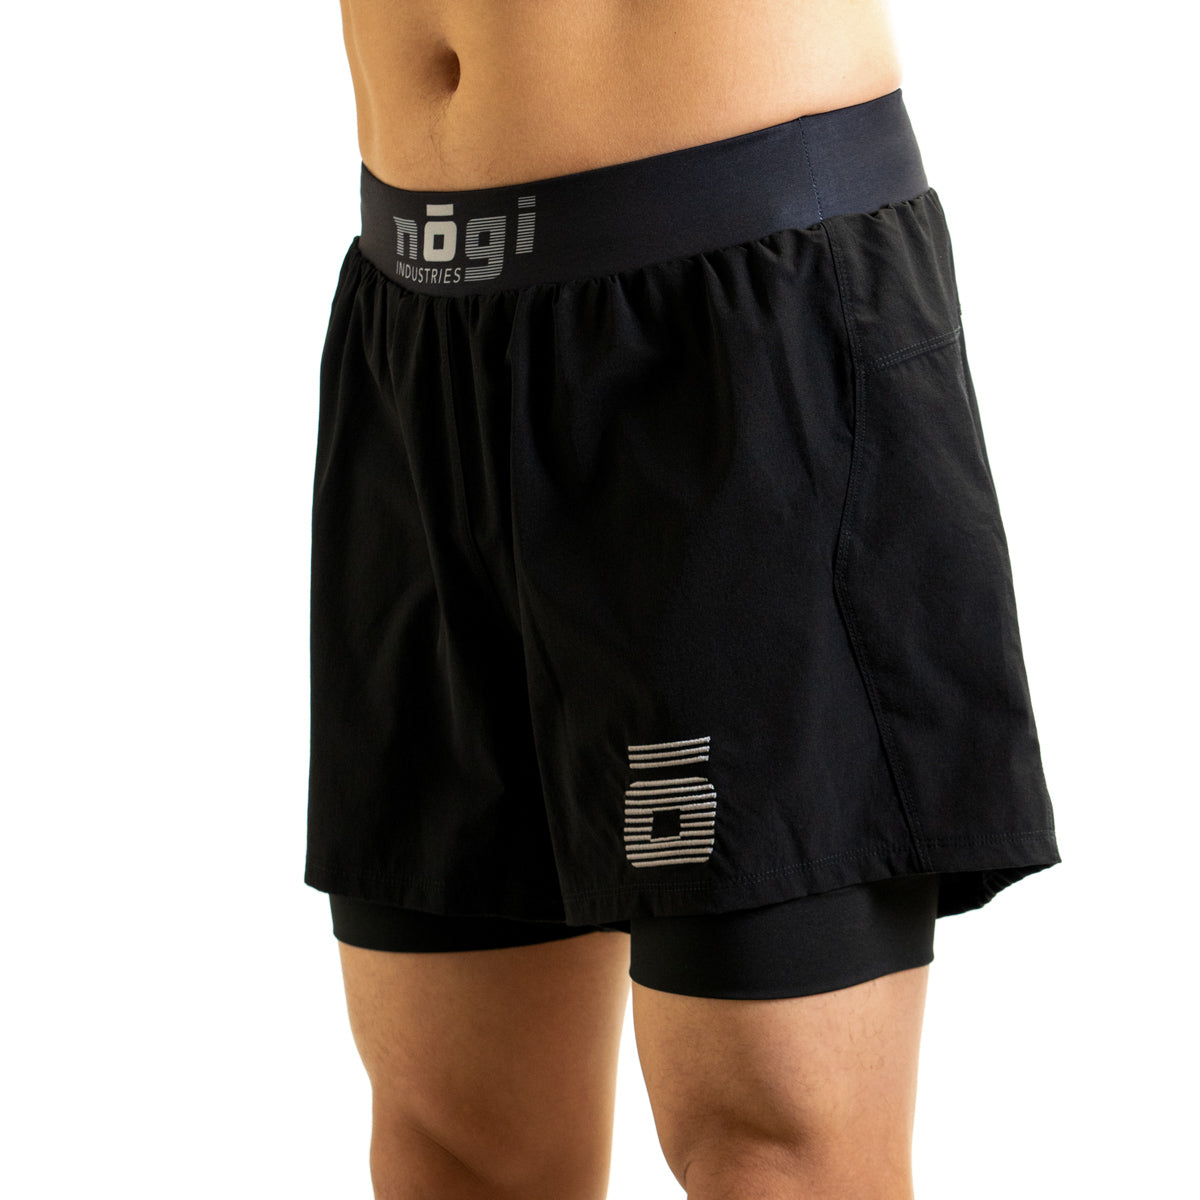 Ghost 5" Premium Lined Grappling Shorts - Obsidian Black left View